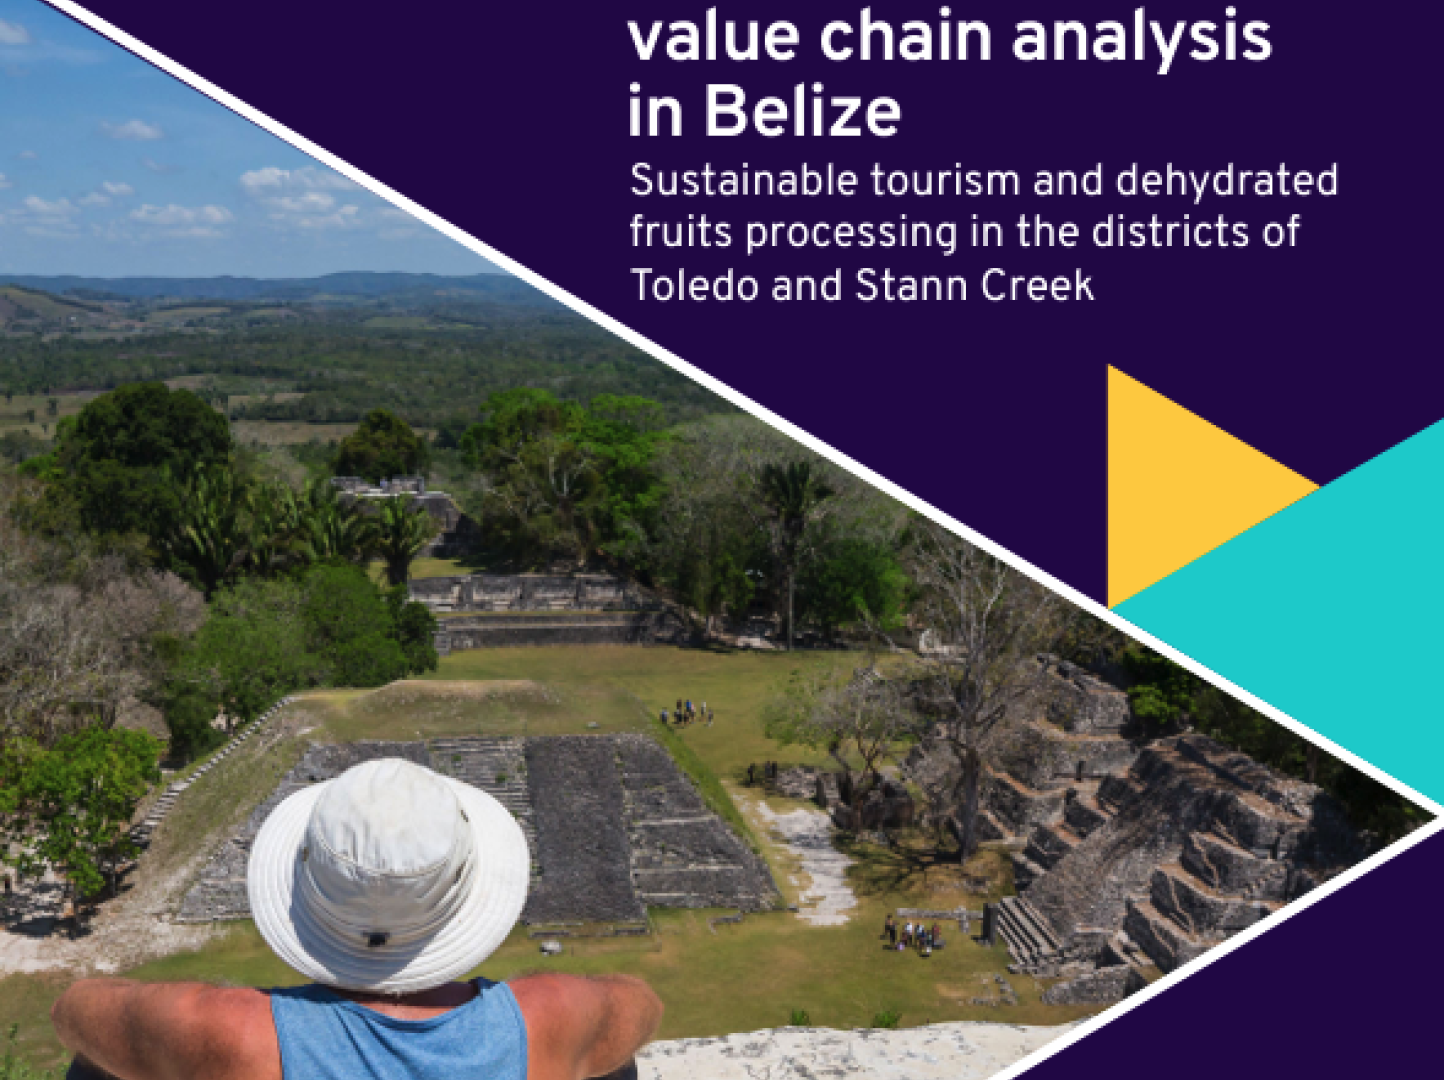 A sector selection and value chain analysis in Belize